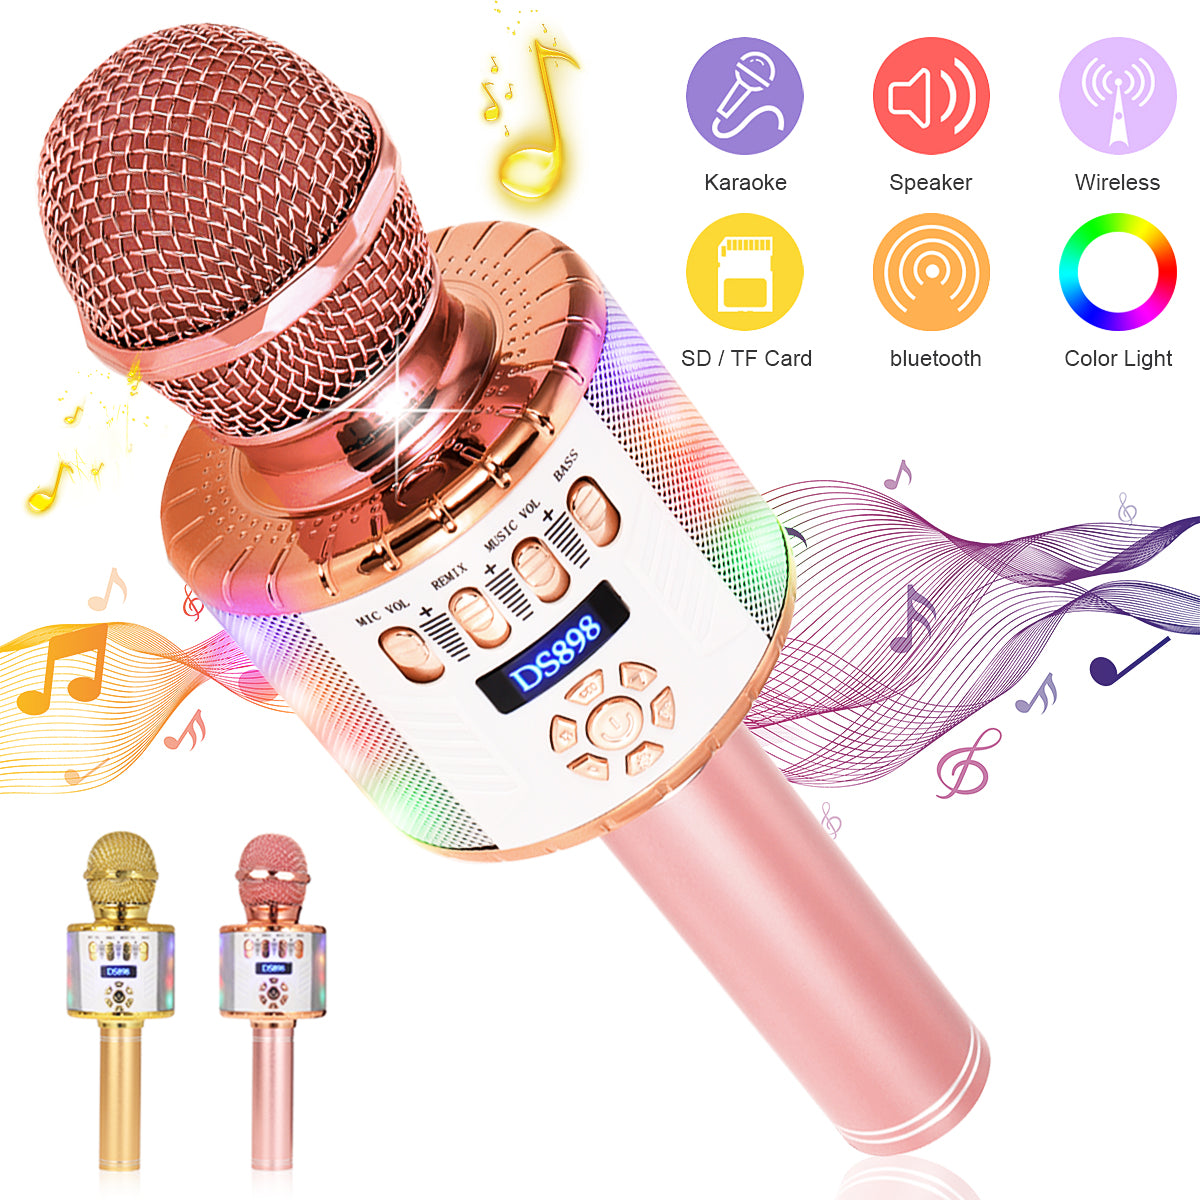 Bakeey DS898 3-in-1 Microphone Wireless bluetooth Microphone bluetooth Speaker Recorder HIFI Noise Reduction TF Card 2400mAh Luminous Handheld Portable Professional K Songs Karaoke Singing Player